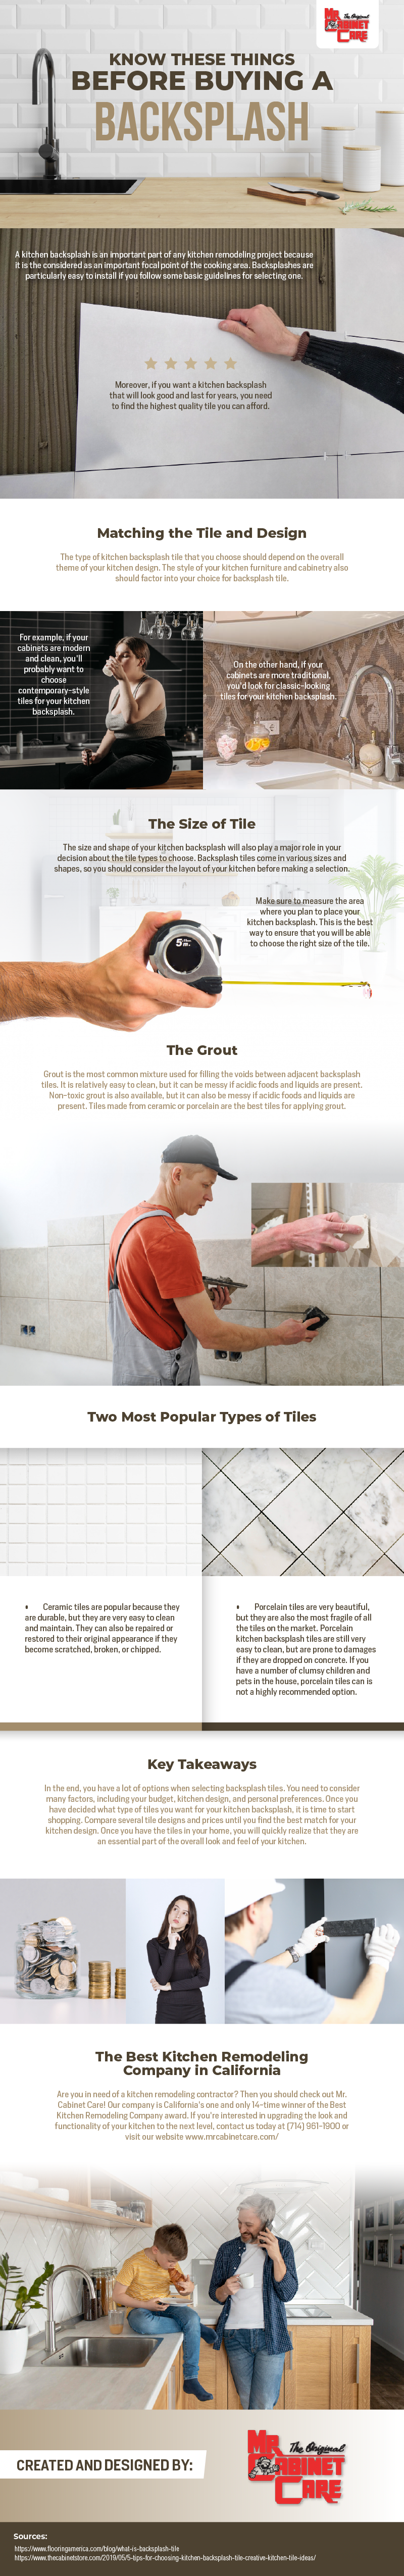 Know These Things Before Buying a Backsplash